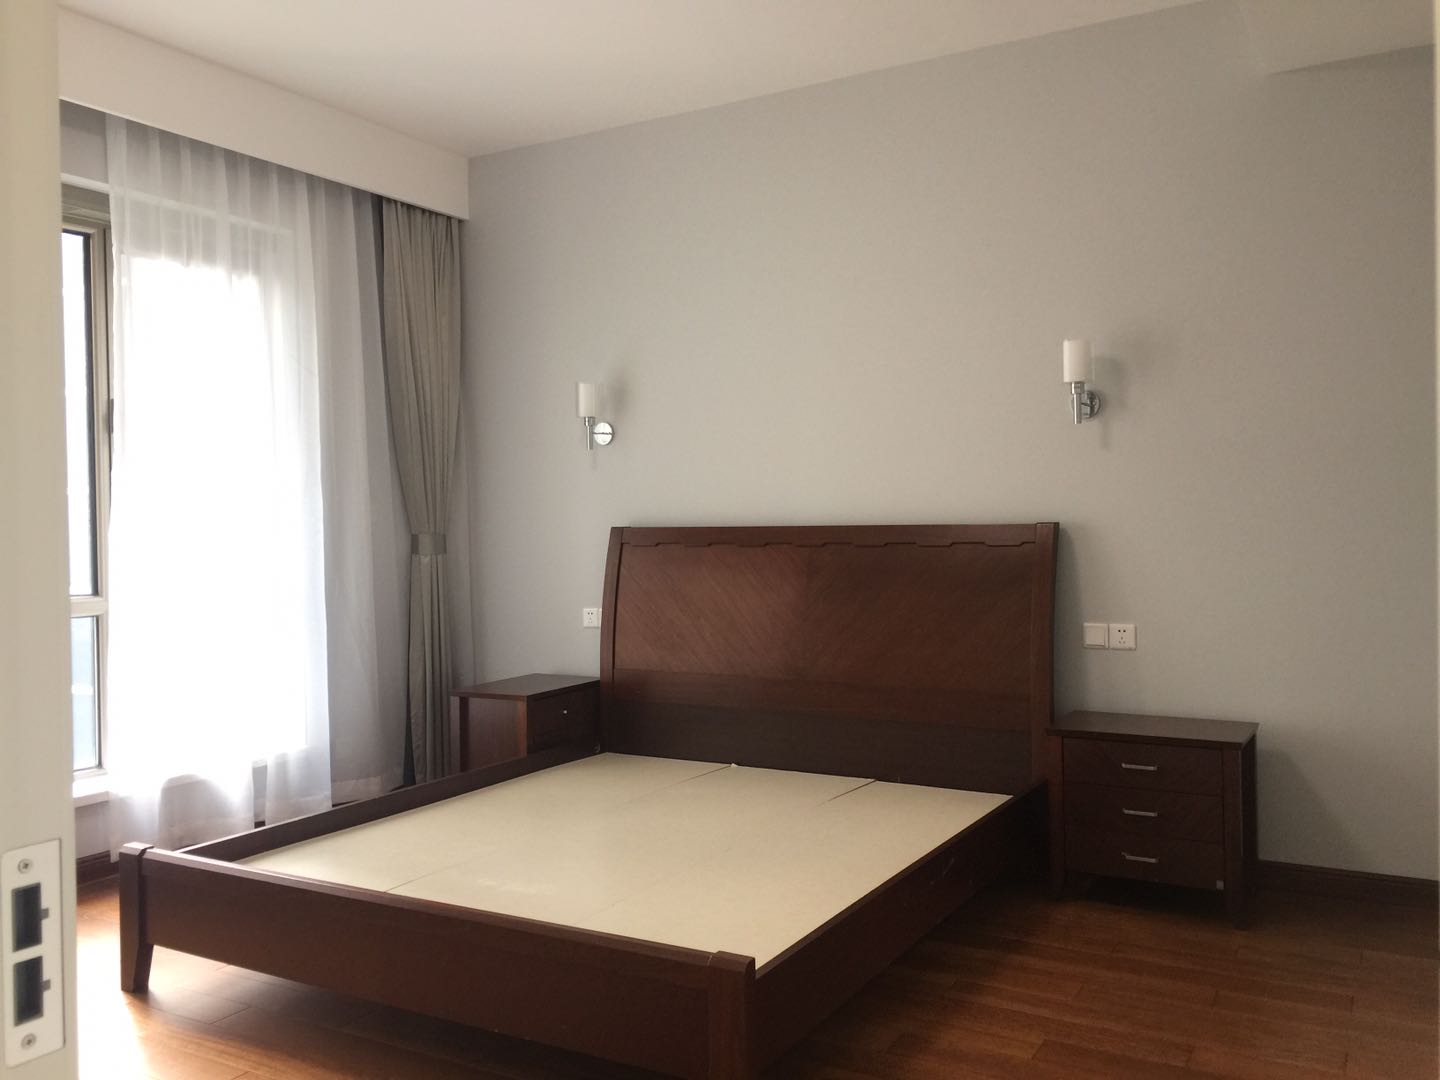 New BED Brand-new Spacious LJZ CBD Apartment for Rent in Shanghai